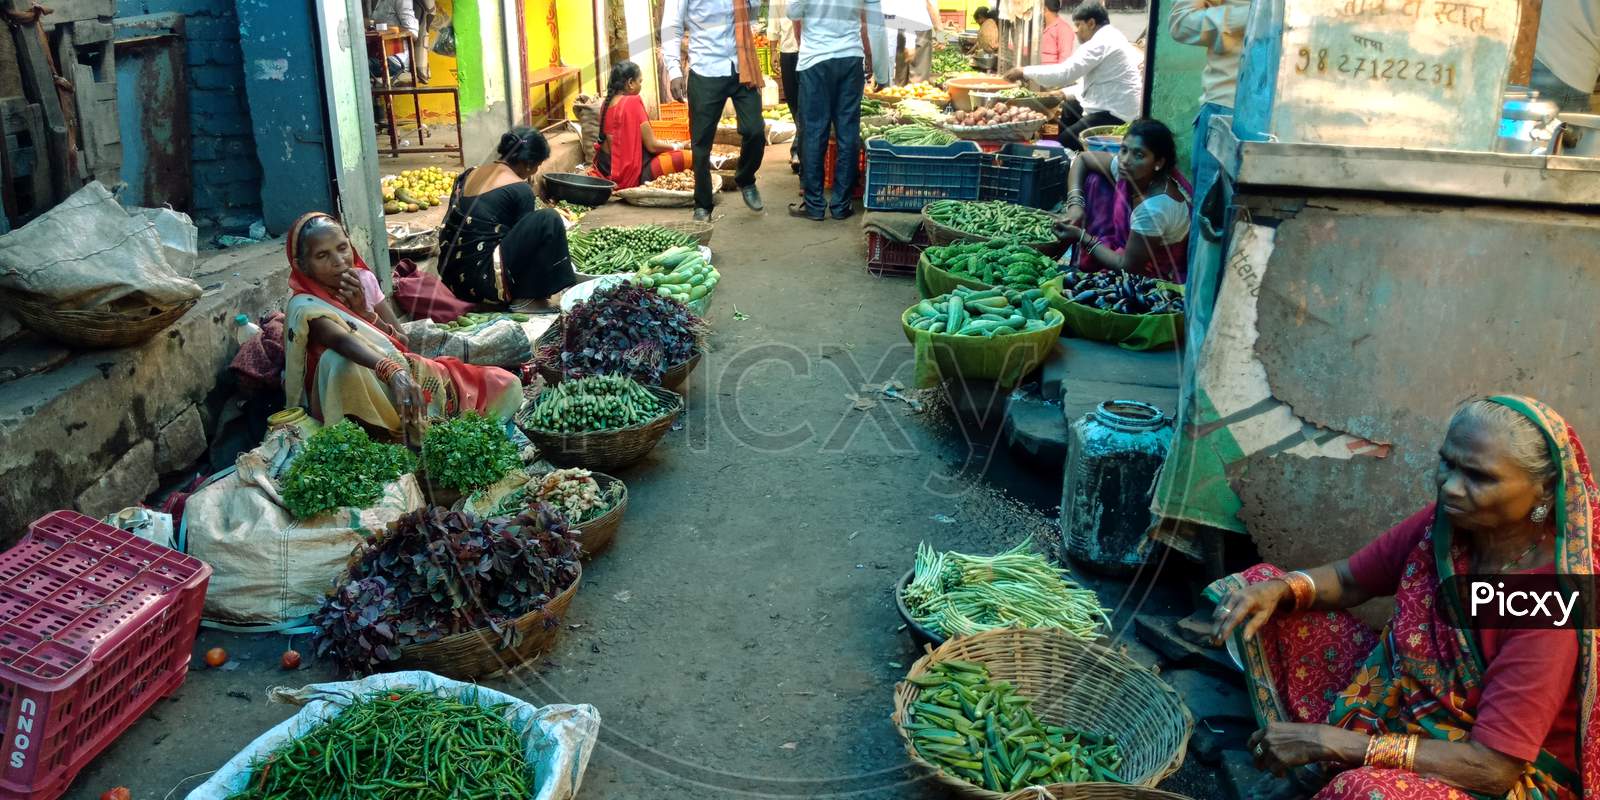 Asian Street Agriculture Product Market.